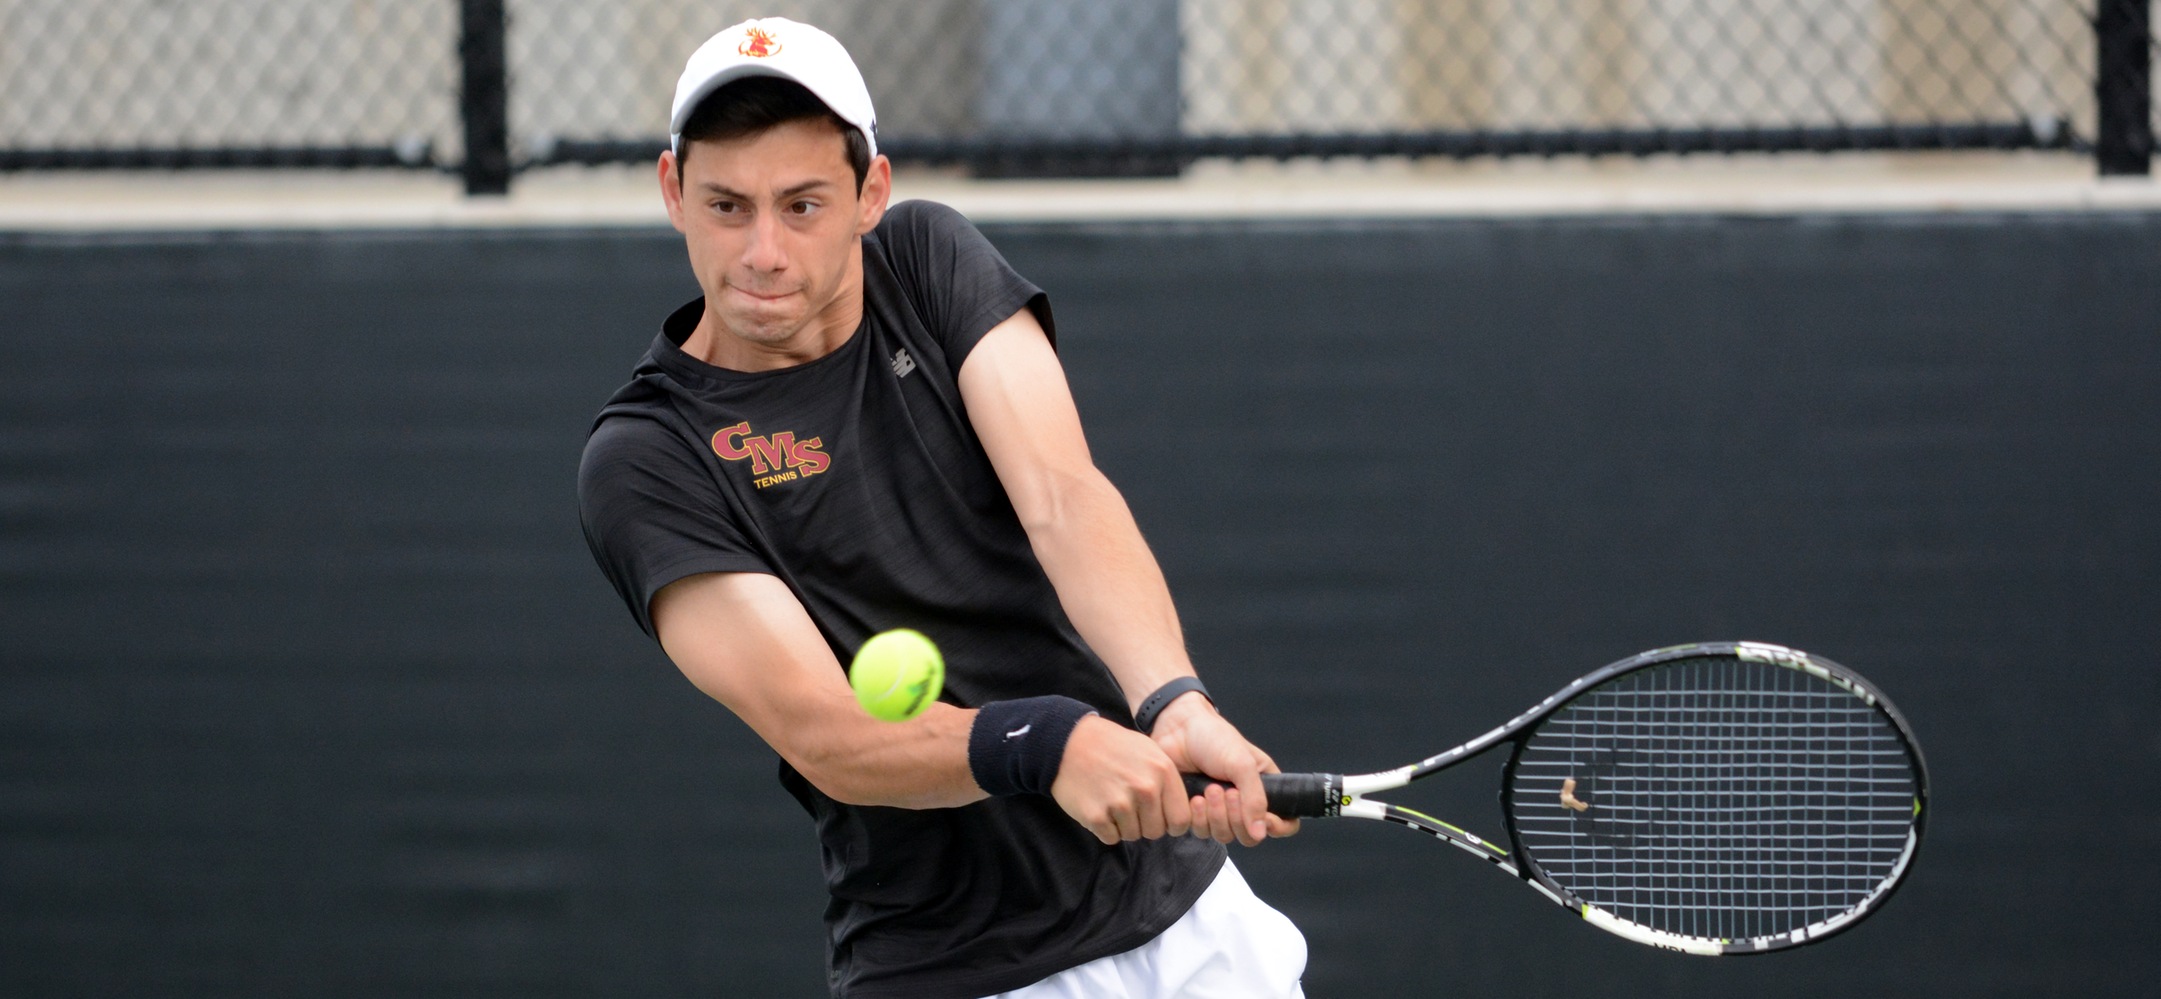 Senior Freddie Simental earned wins at No. 6 singles and No. 3 doubles in CMS' 8-1 win over No. 33 Rensselaer Polytechnic Institute on Sunday.